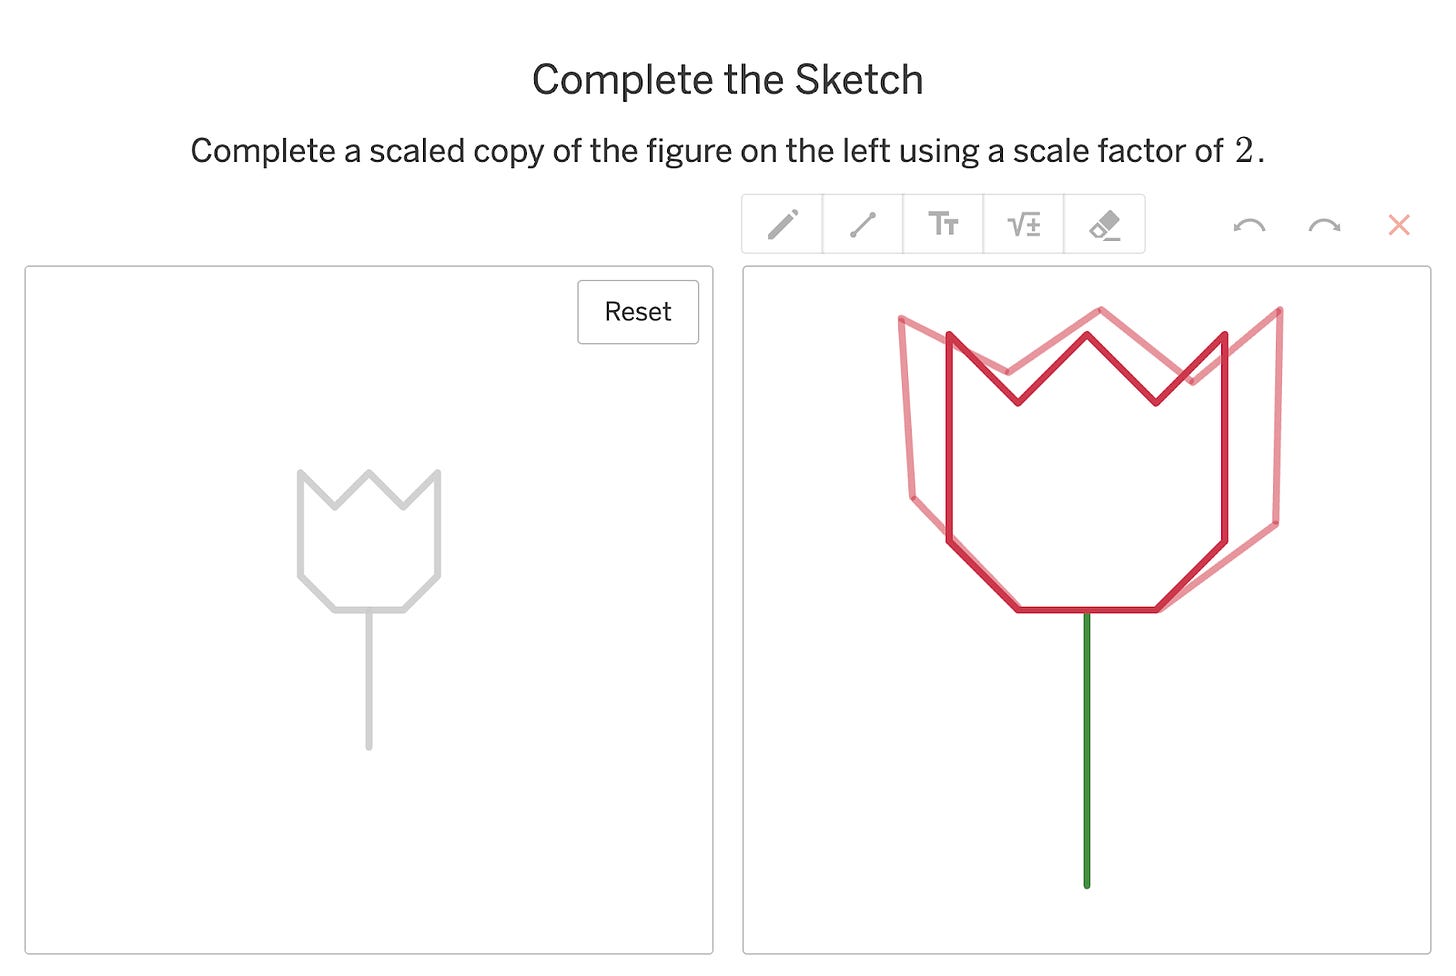 A screen that says "Complete the Sketch" and shows a tulip in one part of the screen and the instructions to "Complete a scaled copy of the figure using a scale factor of two" on the other side.